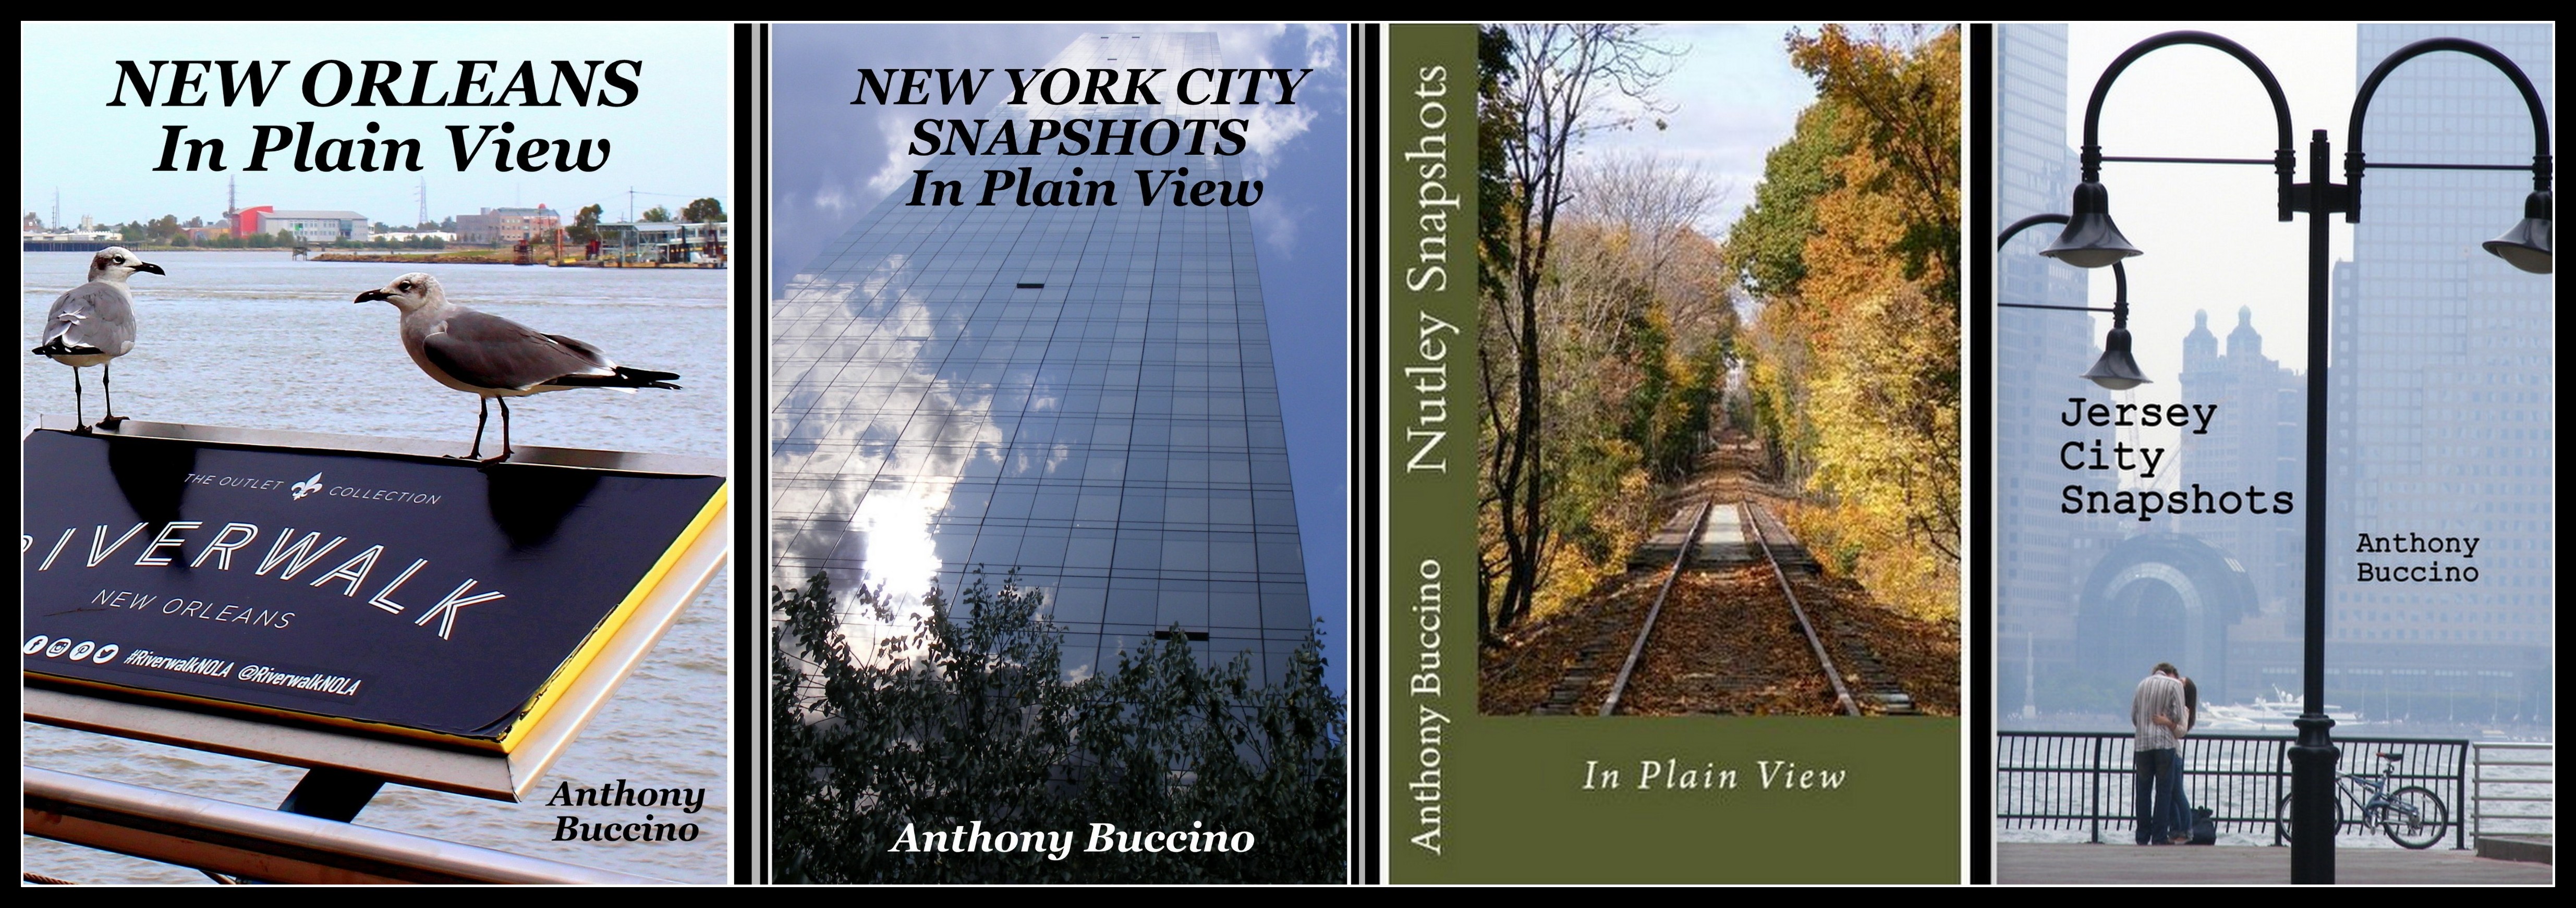 NOLA in Plain View, NYC In Plain View, JC Snapshots, Nutley Snapshots, photo books by Anthony Buccino